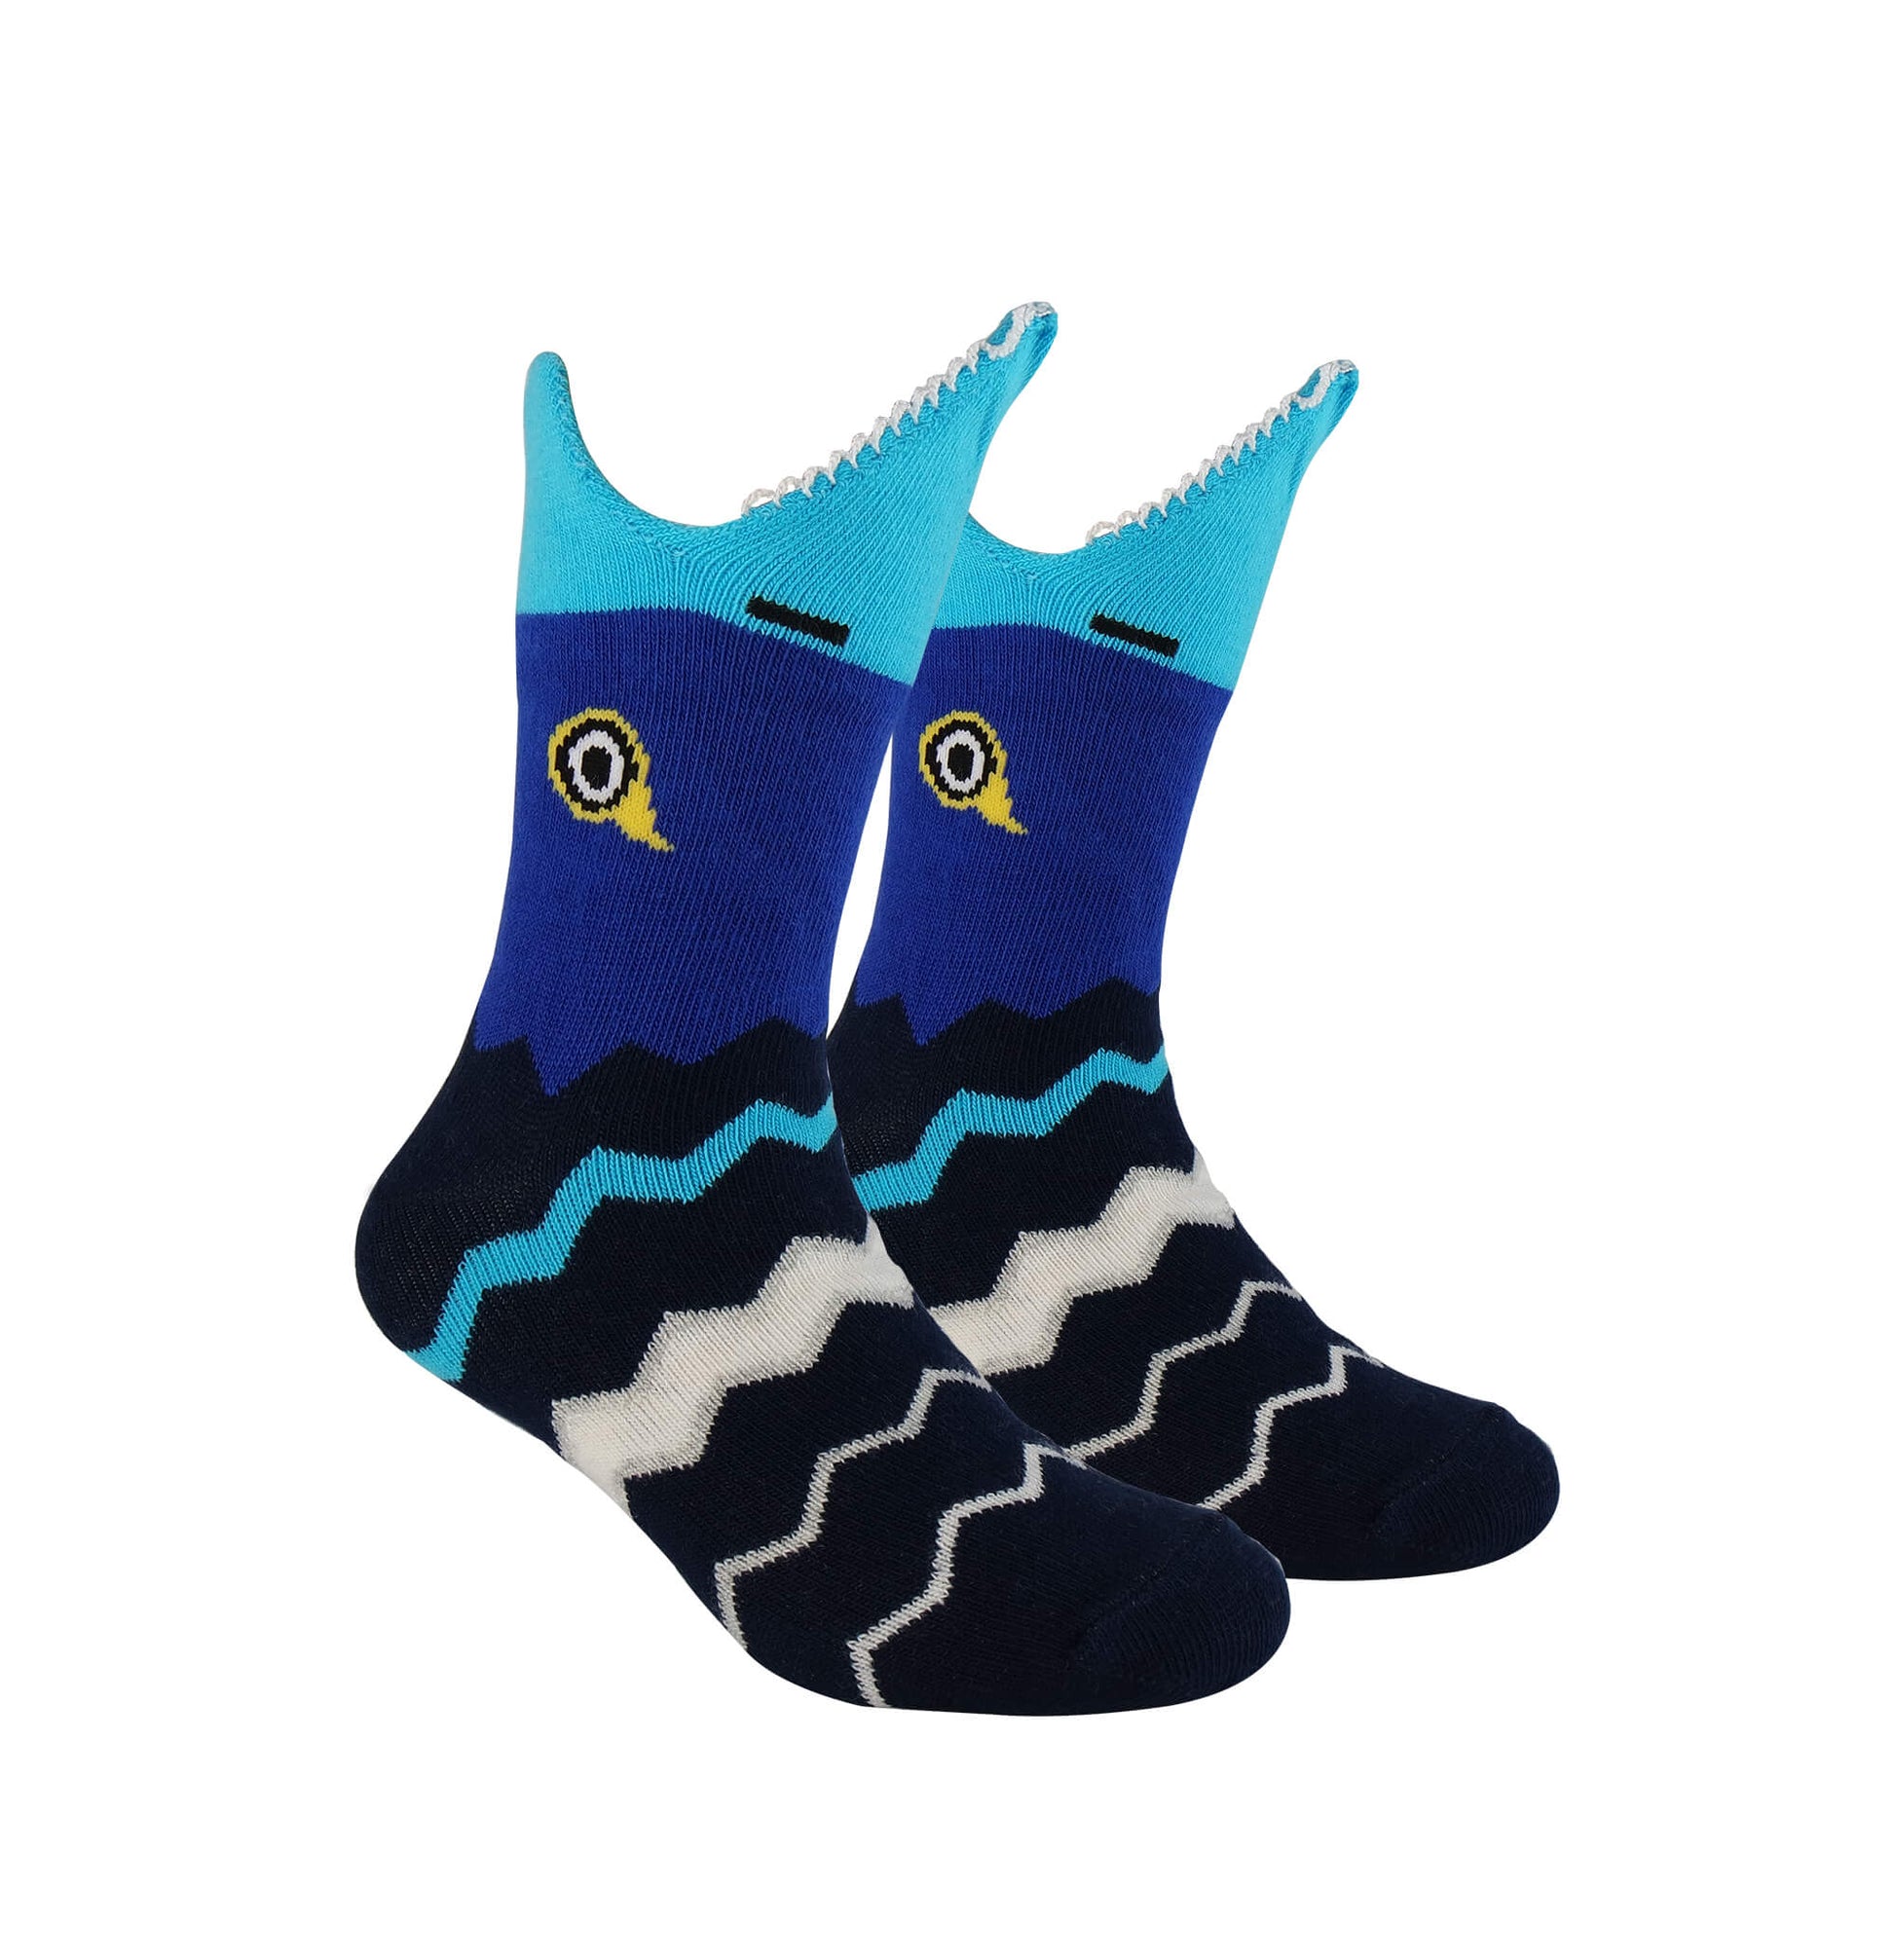 3D blue color shark socks, featuring a striking and realistic shark design for a fun and adventurous look.